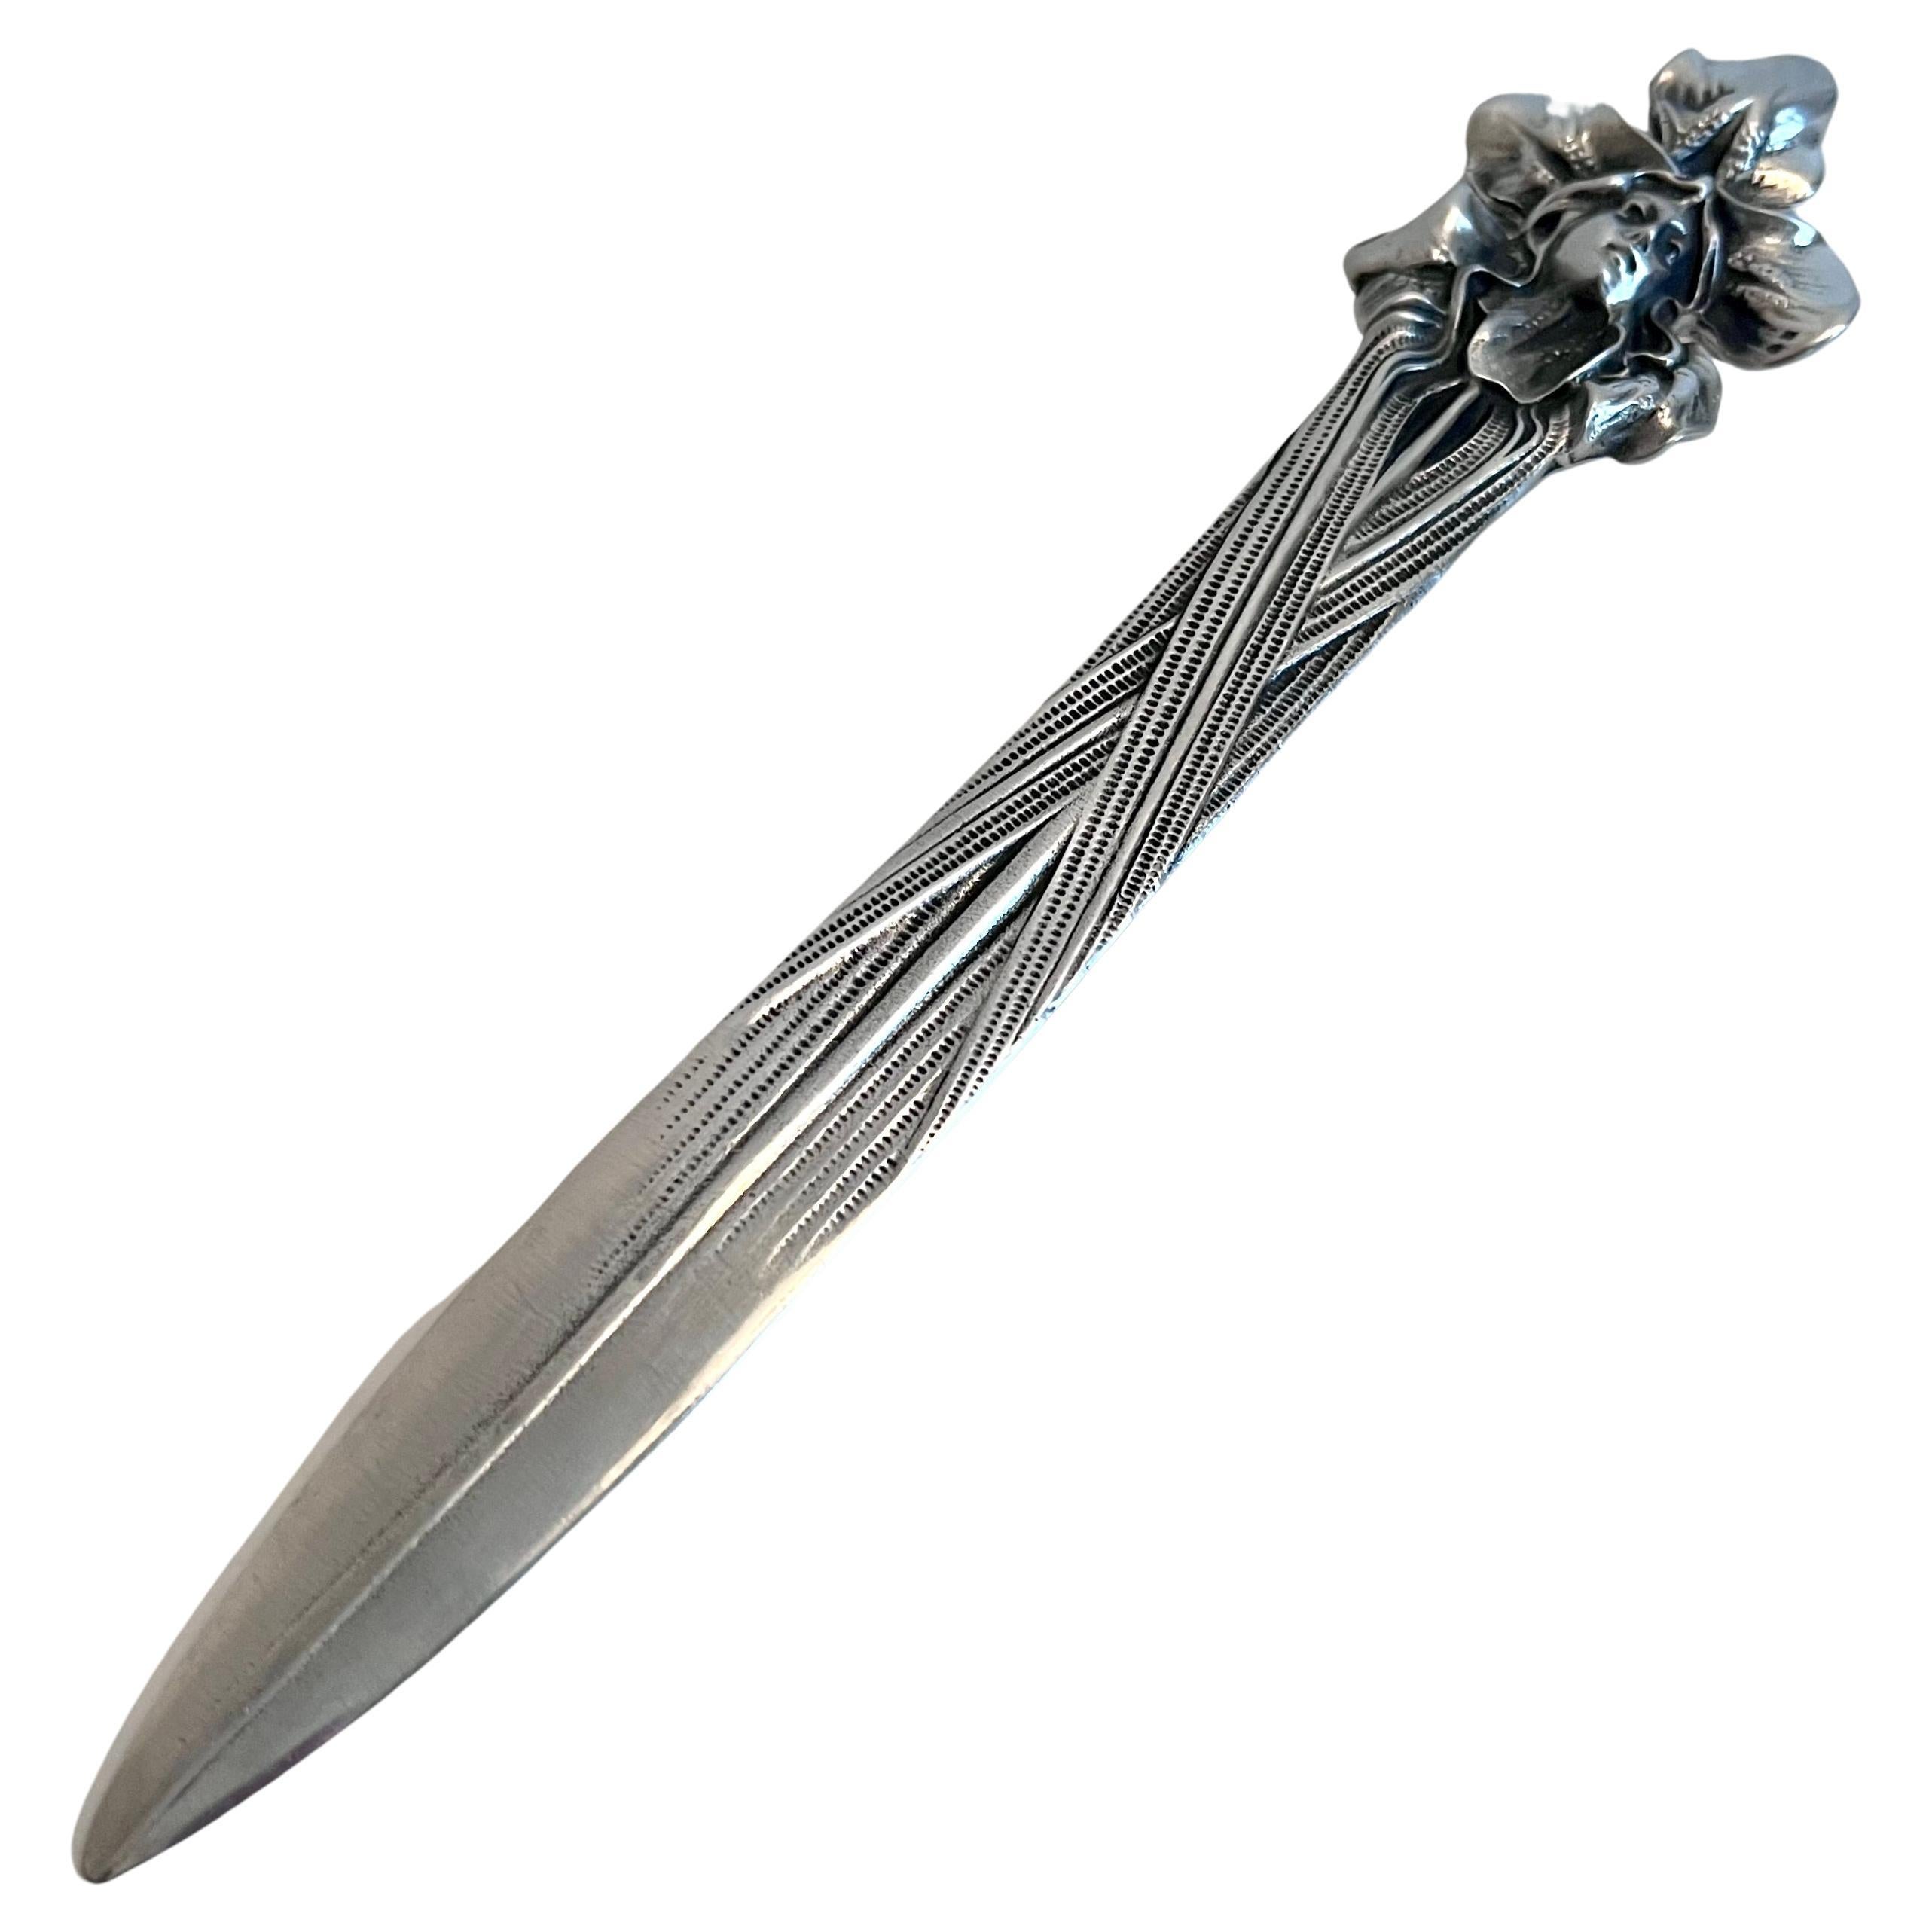 Art Nouveau Silver Pewter Letter Opener with the Image of a Lady